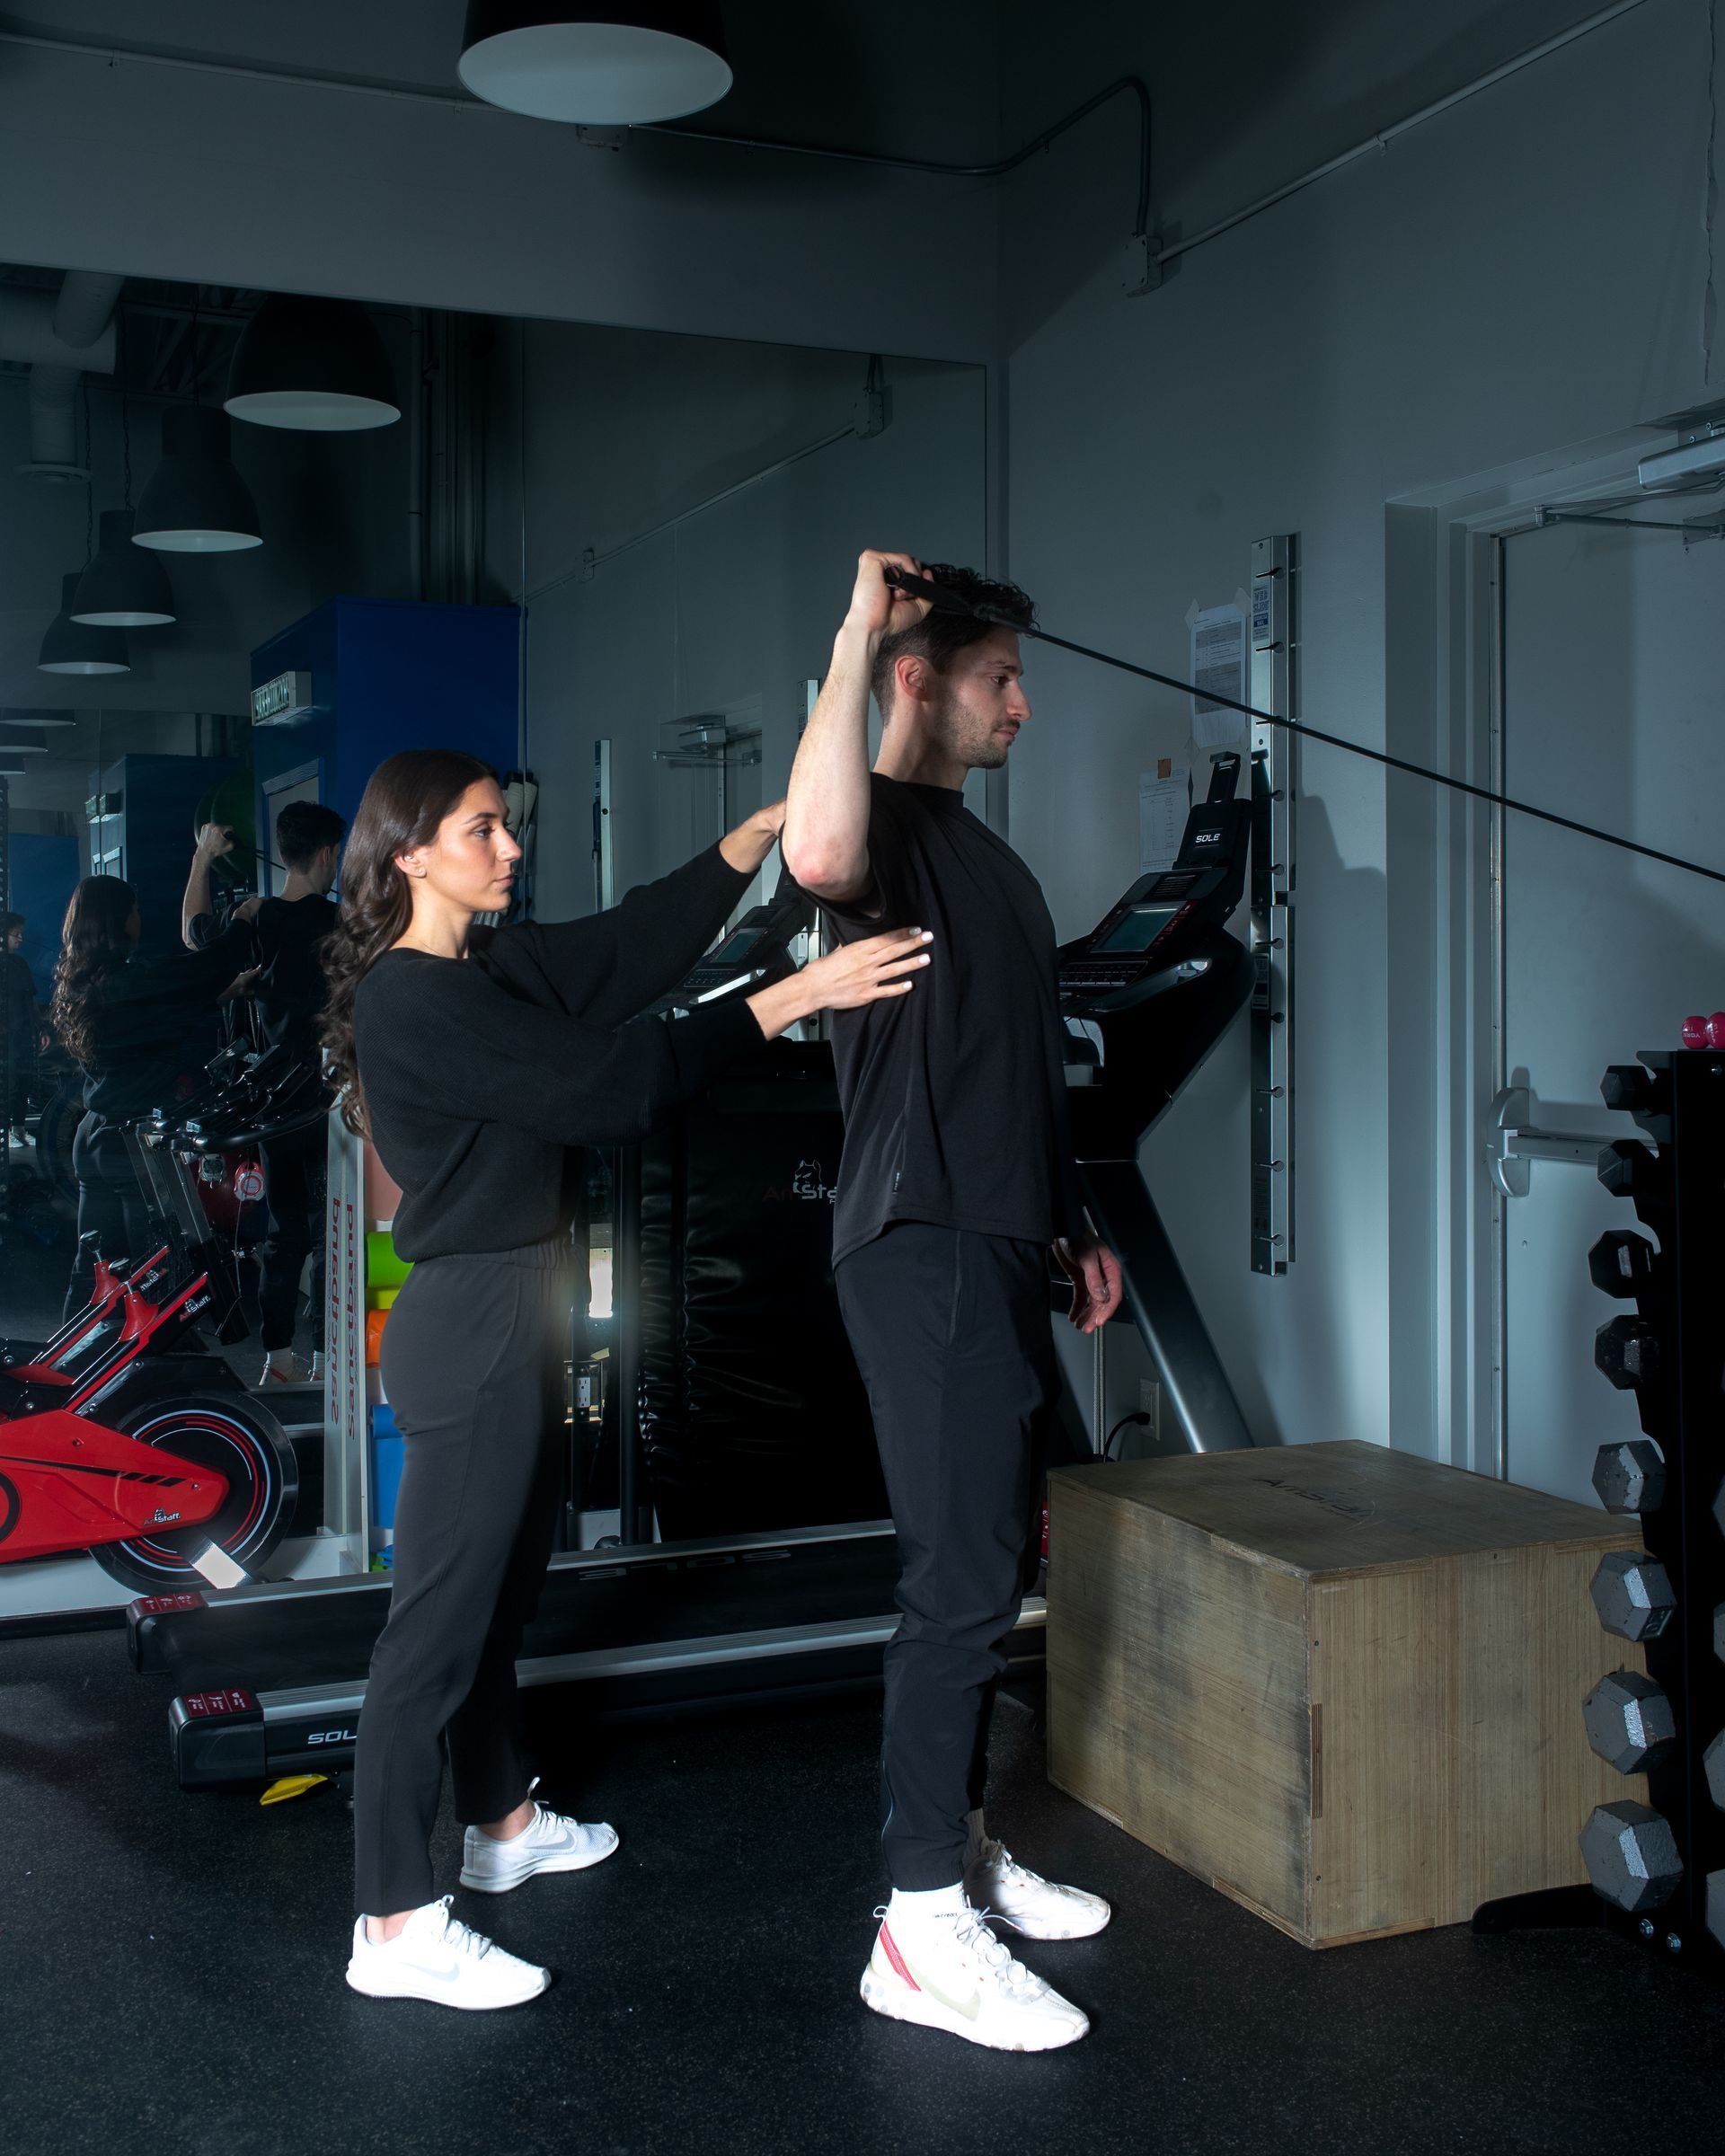 a woman is helping a man stretch his arm in a gym